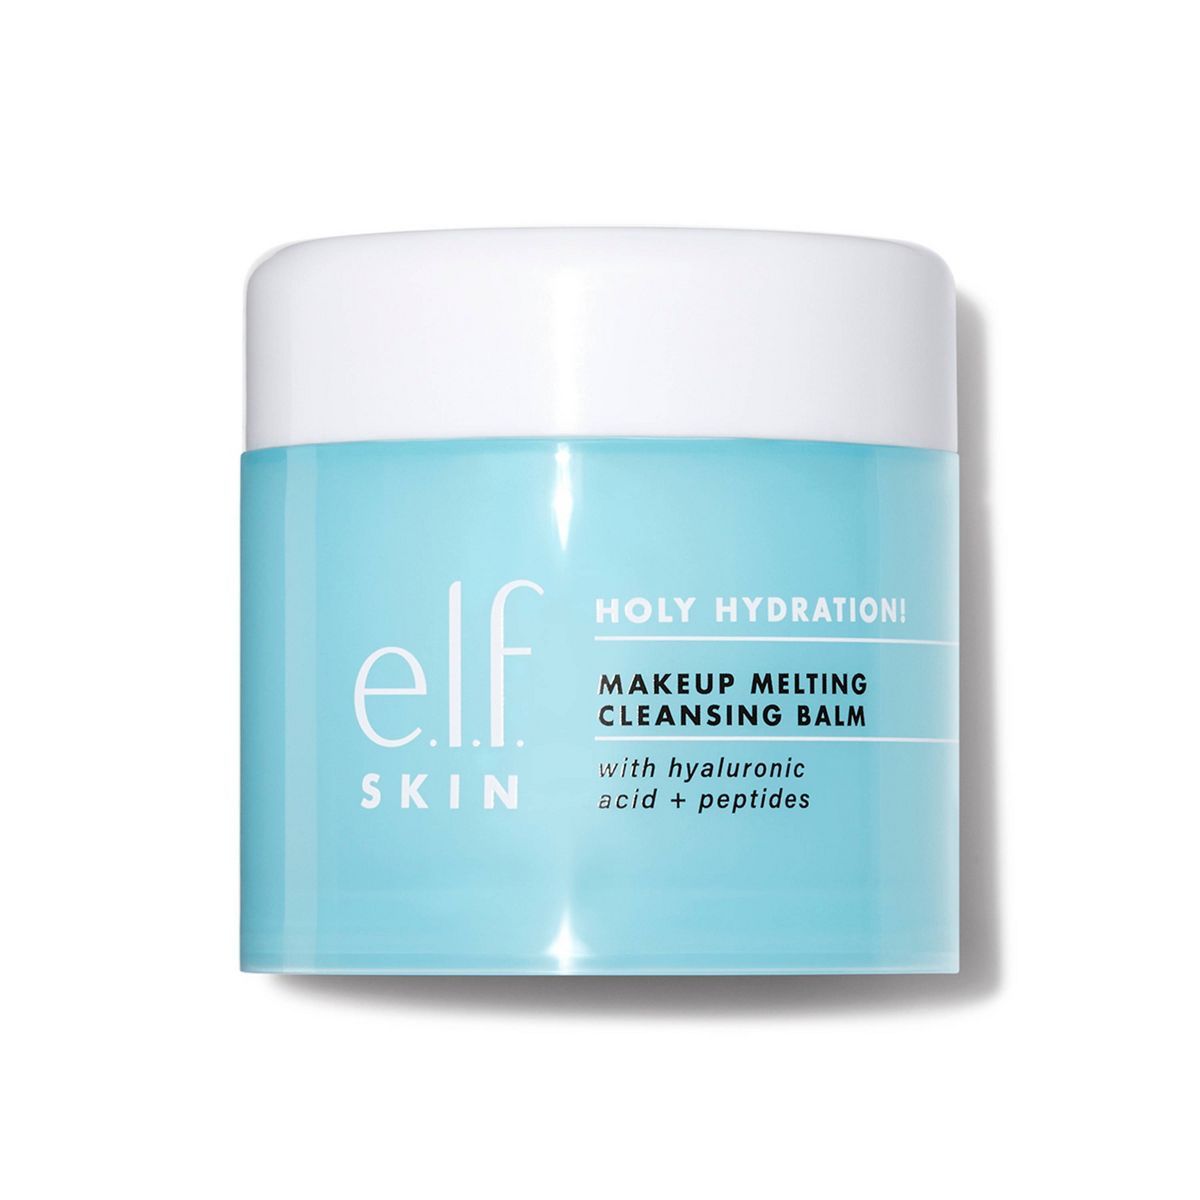 e.l.f. Holy Hydration! Makeup Unscented Melting Cleansing Balm - 2oz | Target